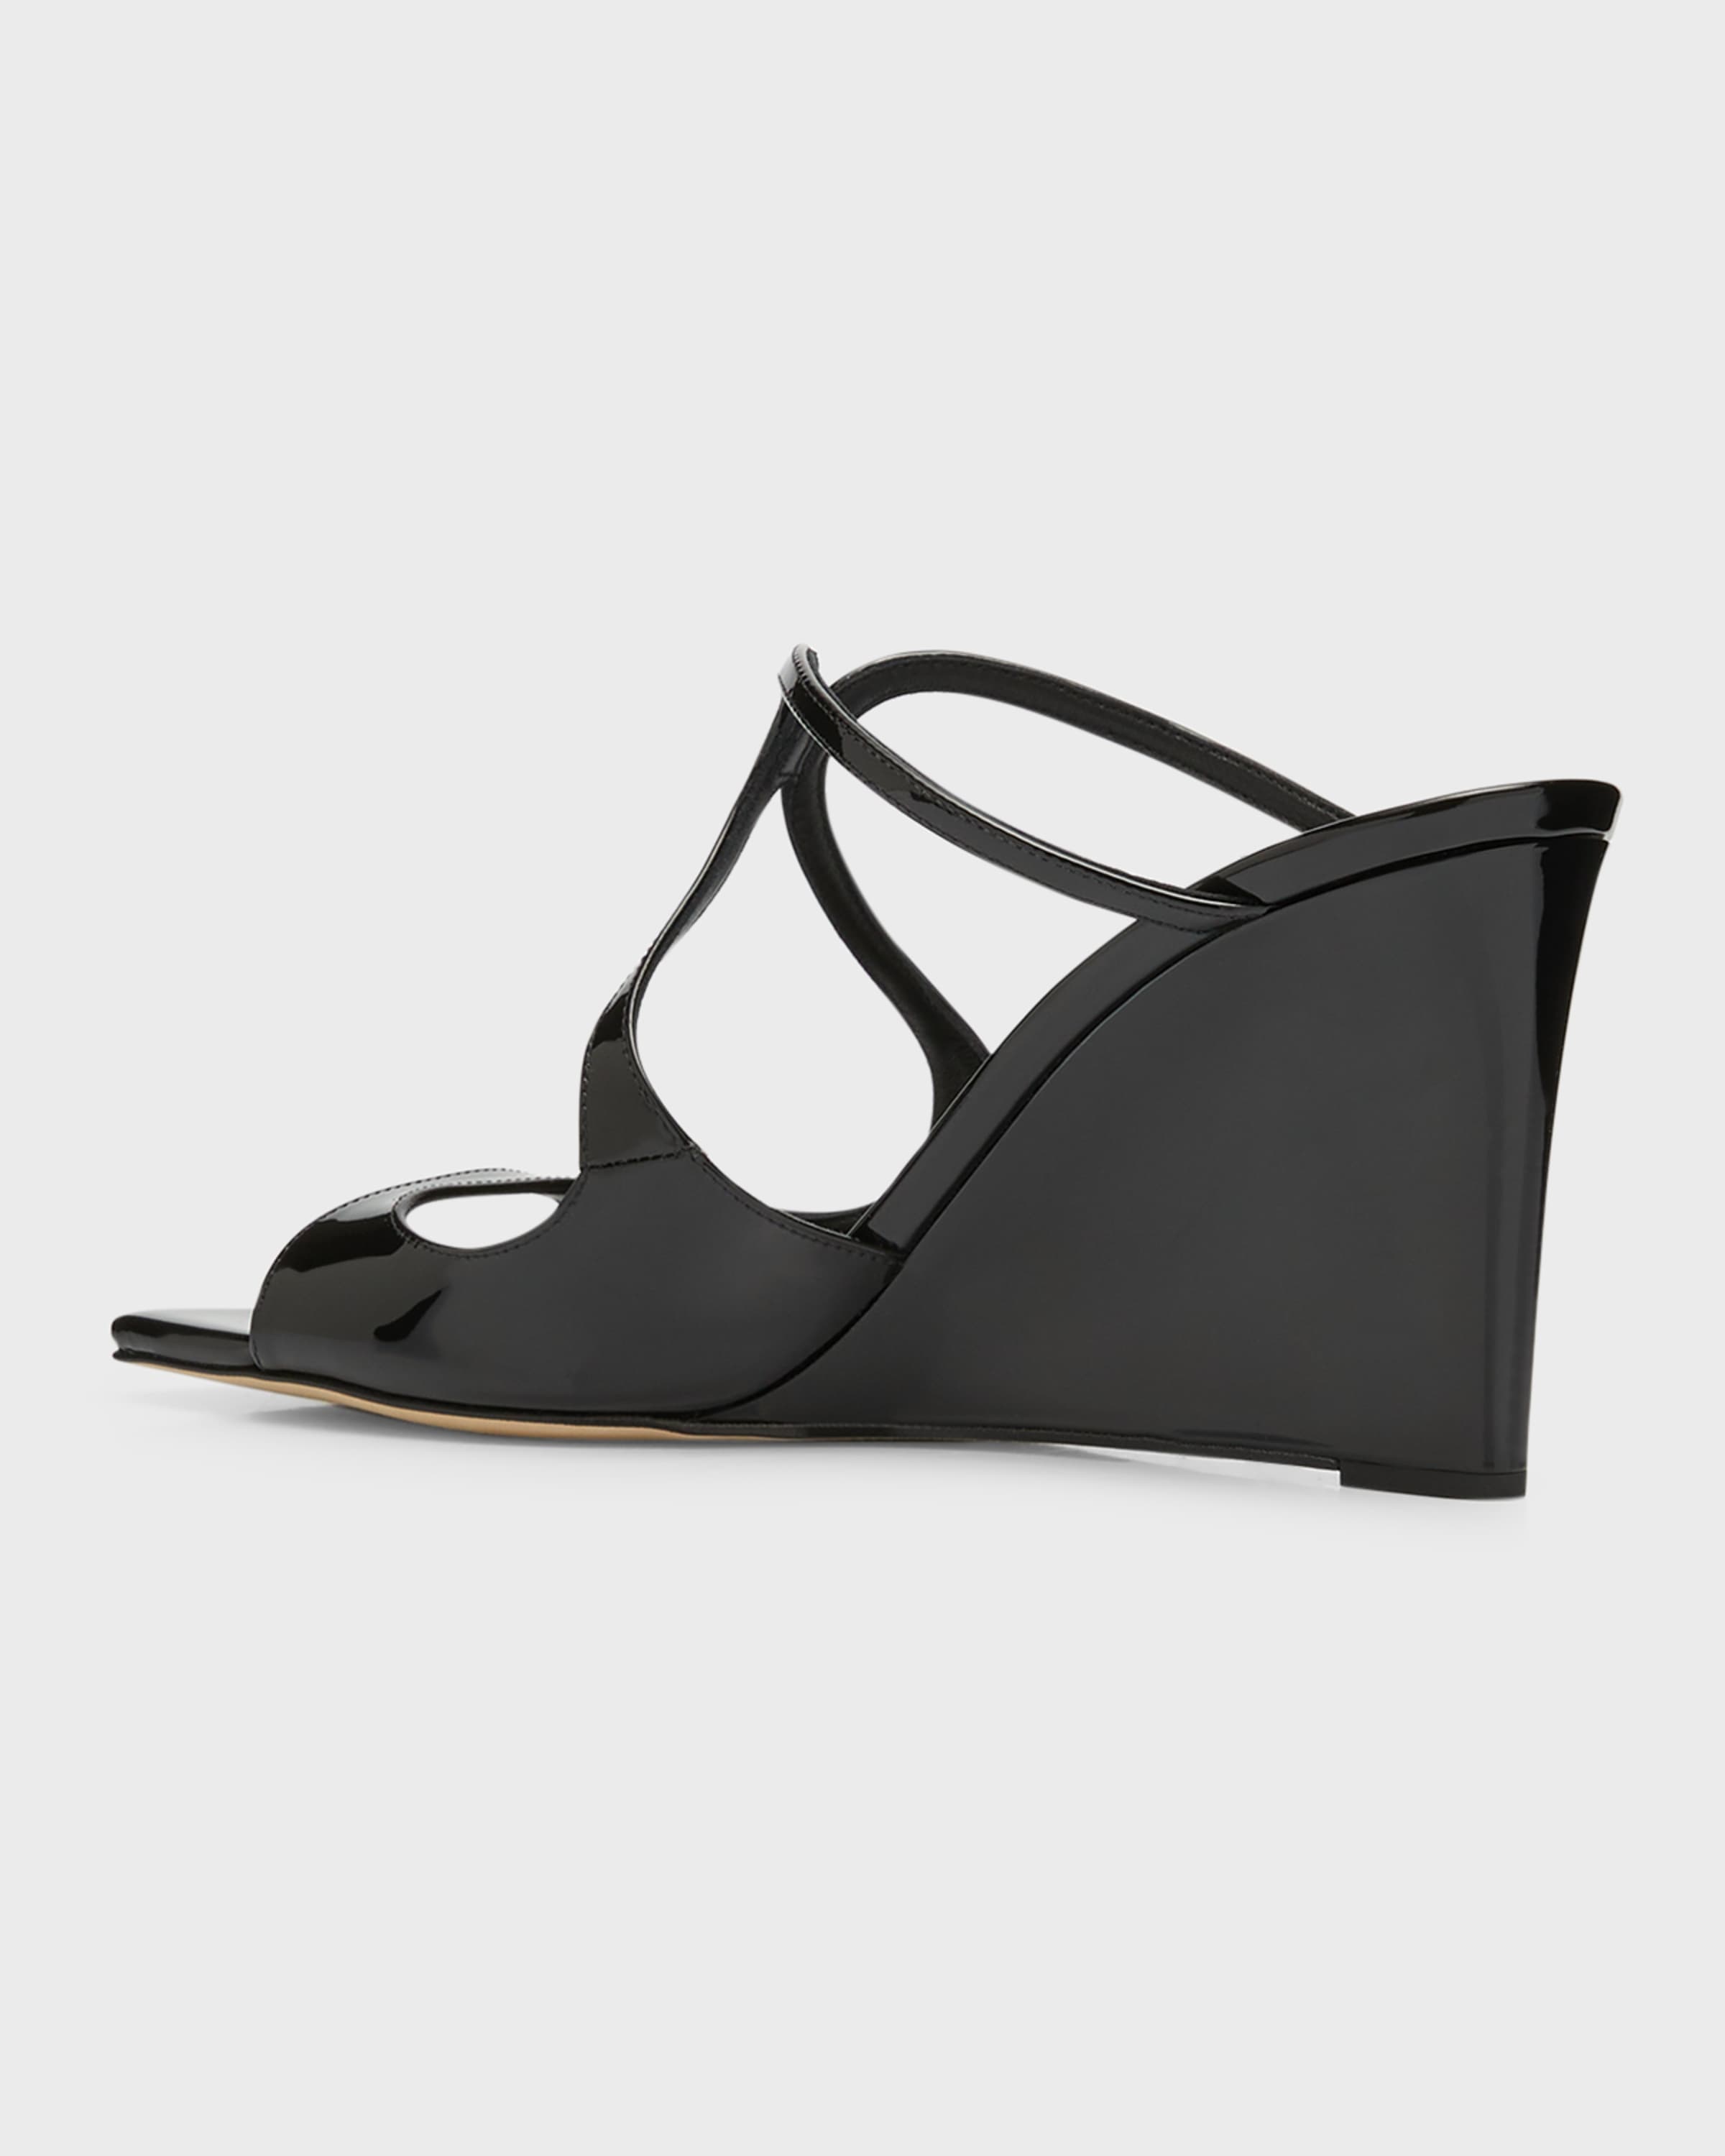 Anise Patent Leather Wedge Sandals - 5